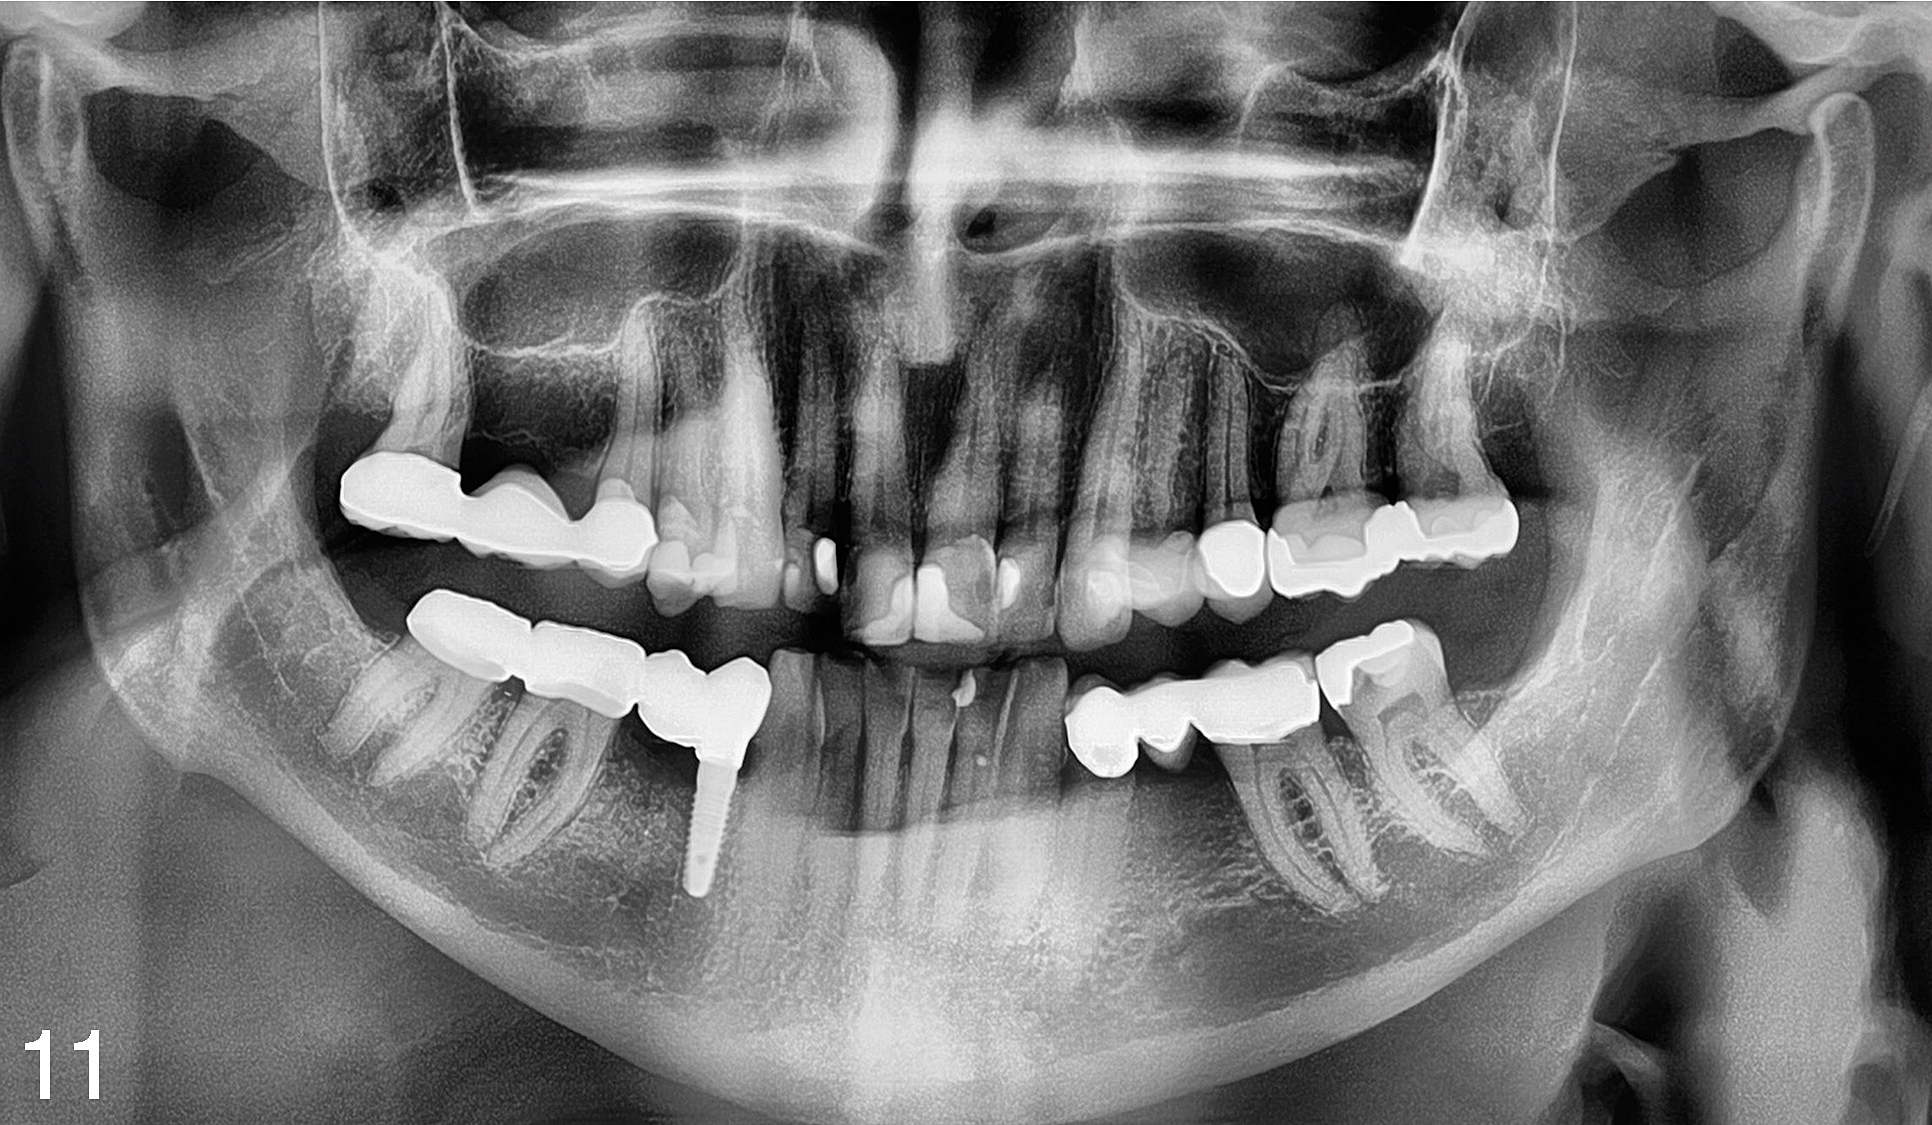 Hybrid bridge (posterior teeth #30 and #31 and implant #28) performed by general dentist after 9 months. Vertical dimension of the bone remains stable.